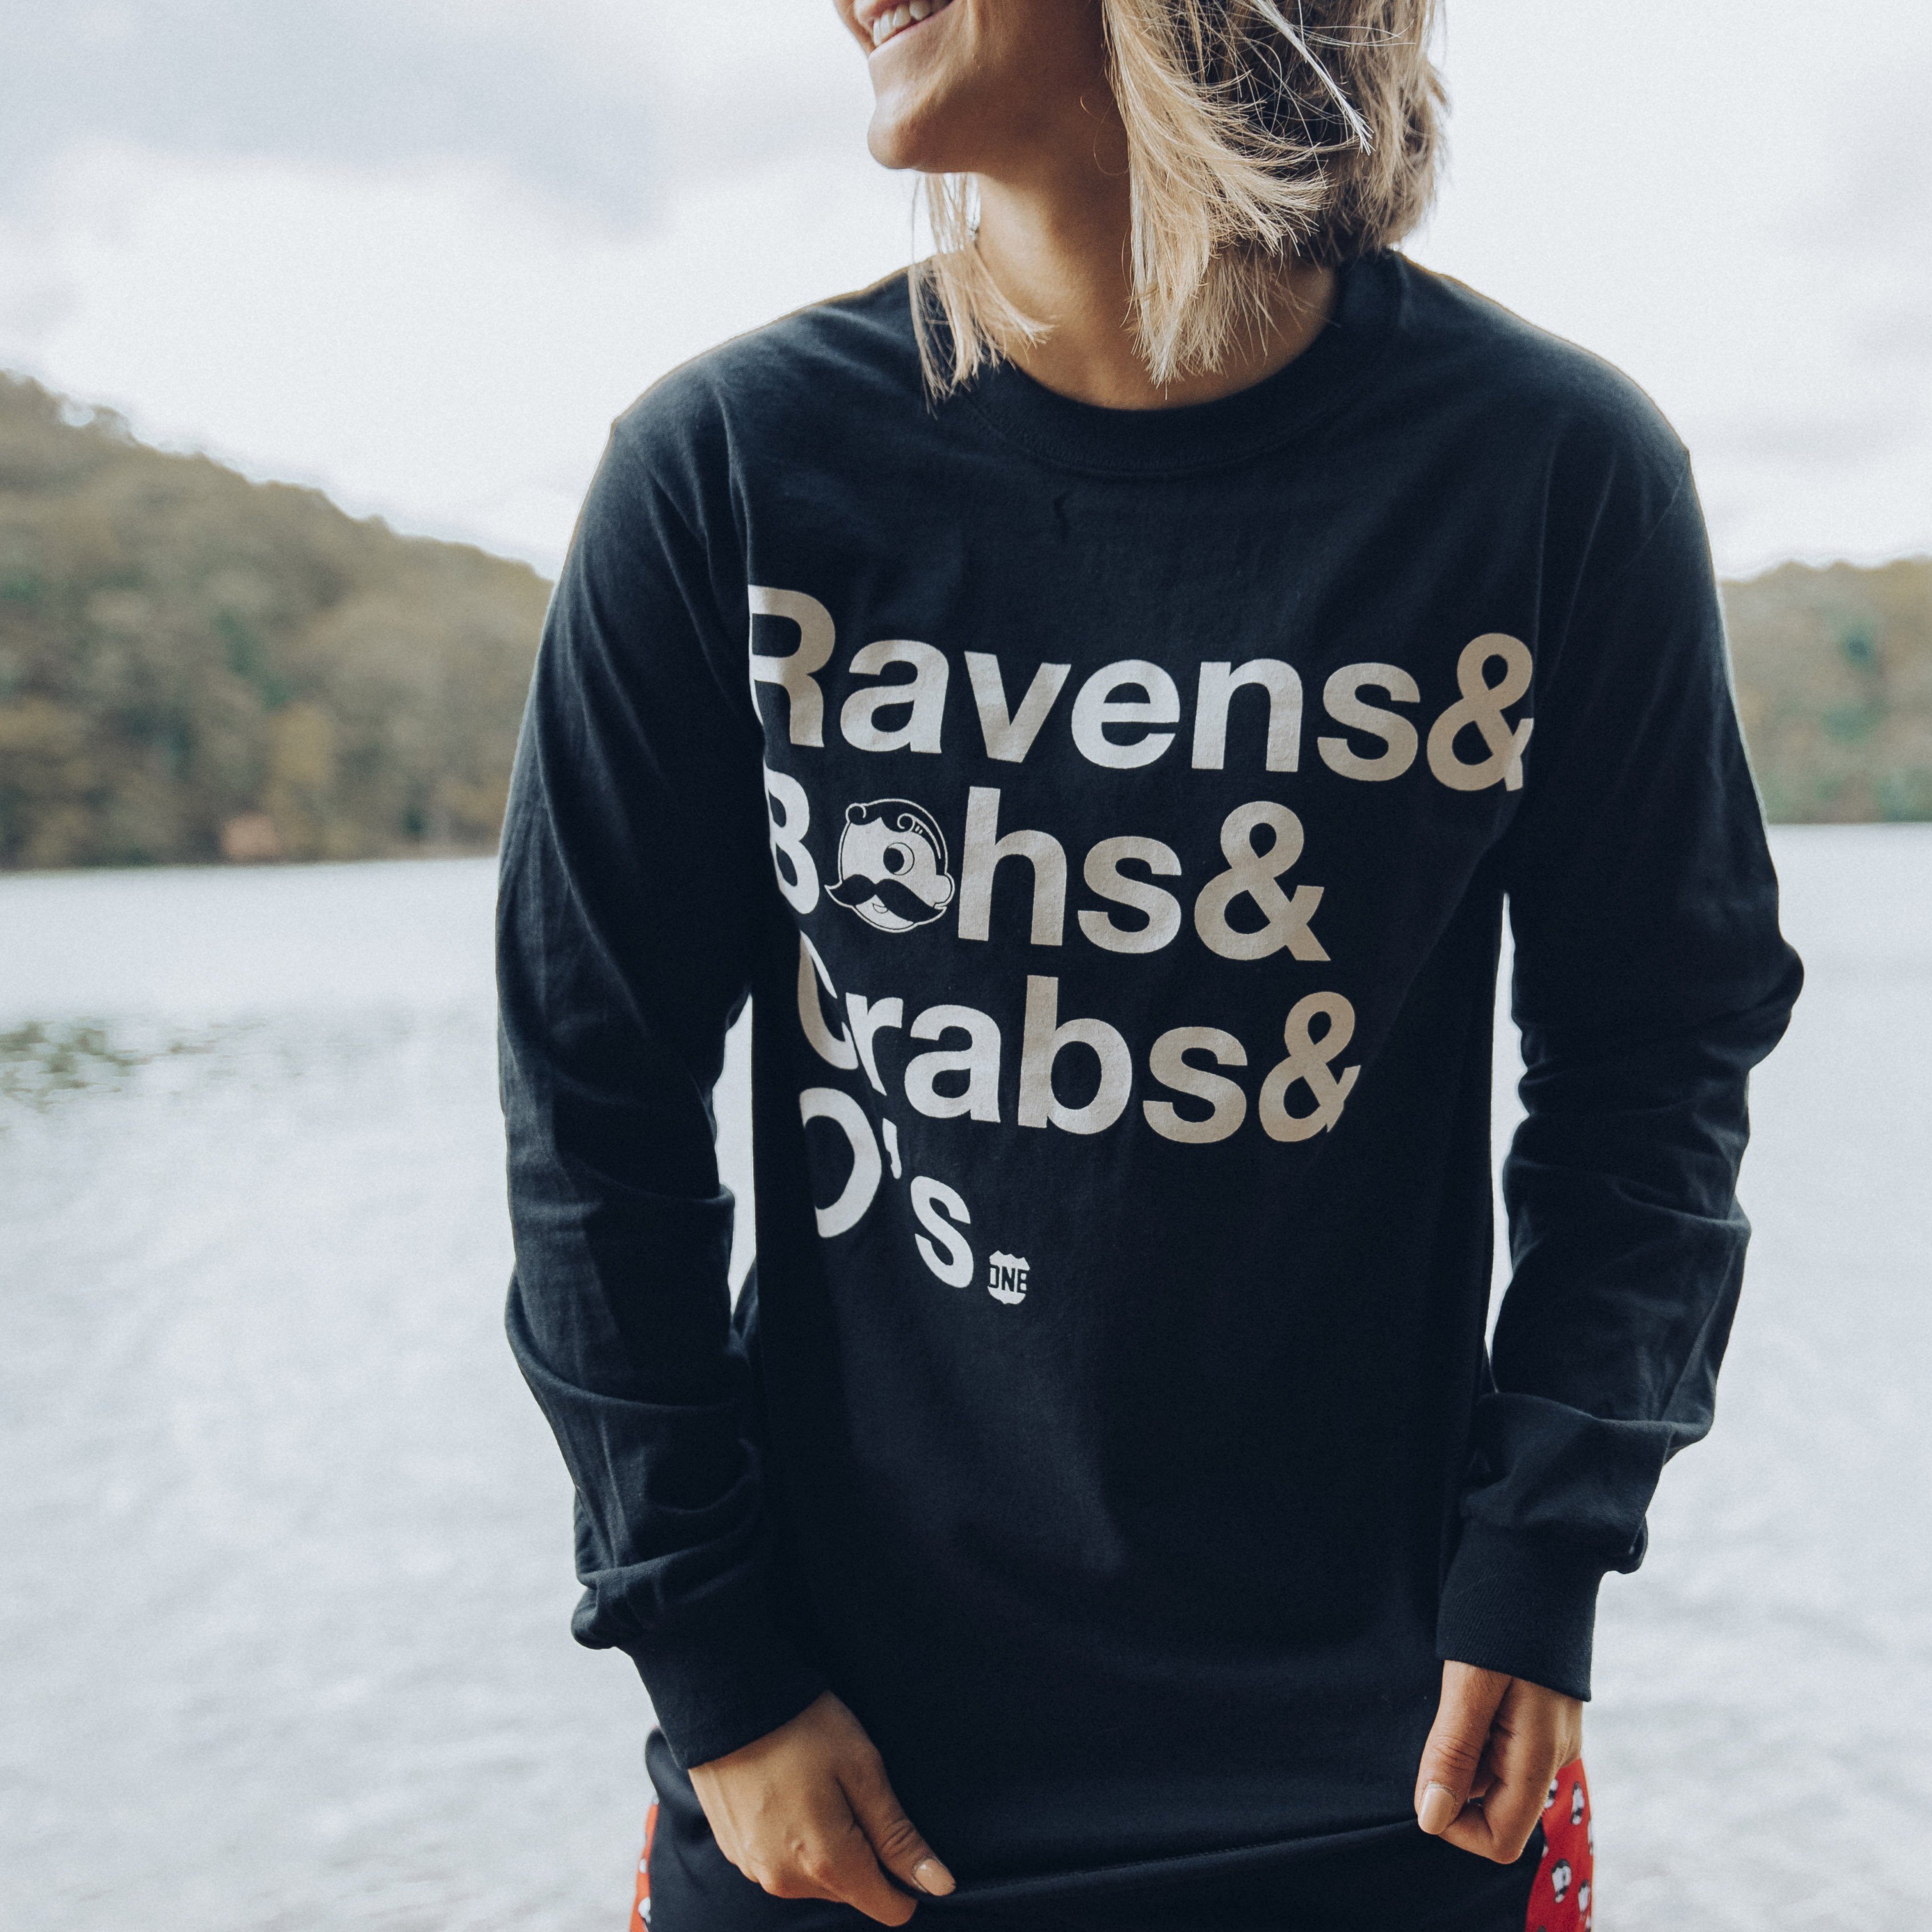 Ravens & Bohs & Crabs & O's Helvetica *With Natty Boh Logo* (Black) / Long Sleeve Shirt - Route One Apparel